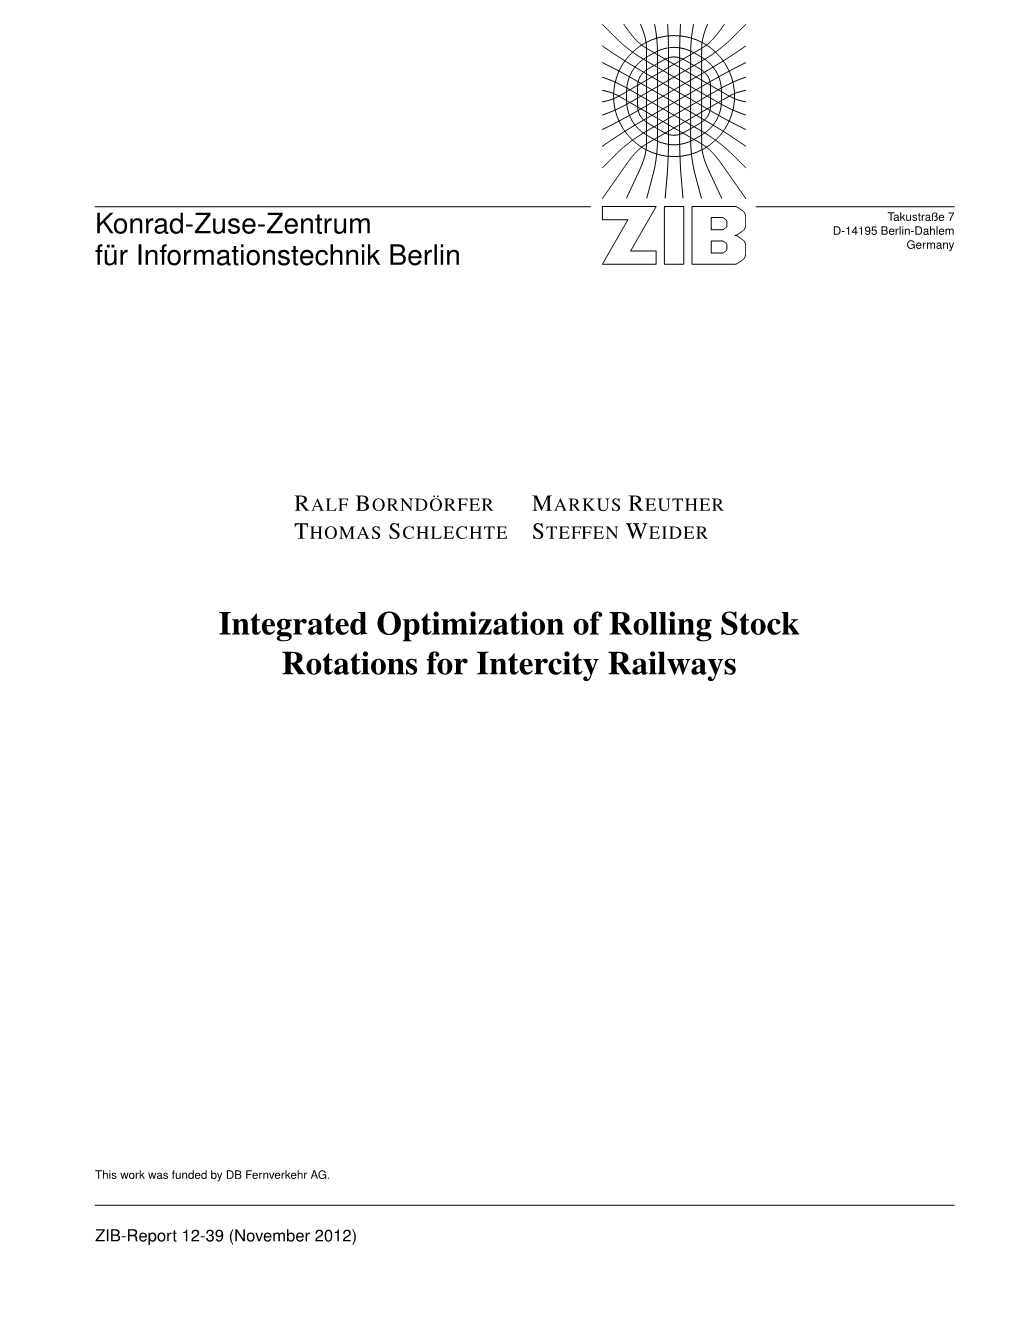 Integrated Optimization of Rolling Stock Rotations for Intercity Railways